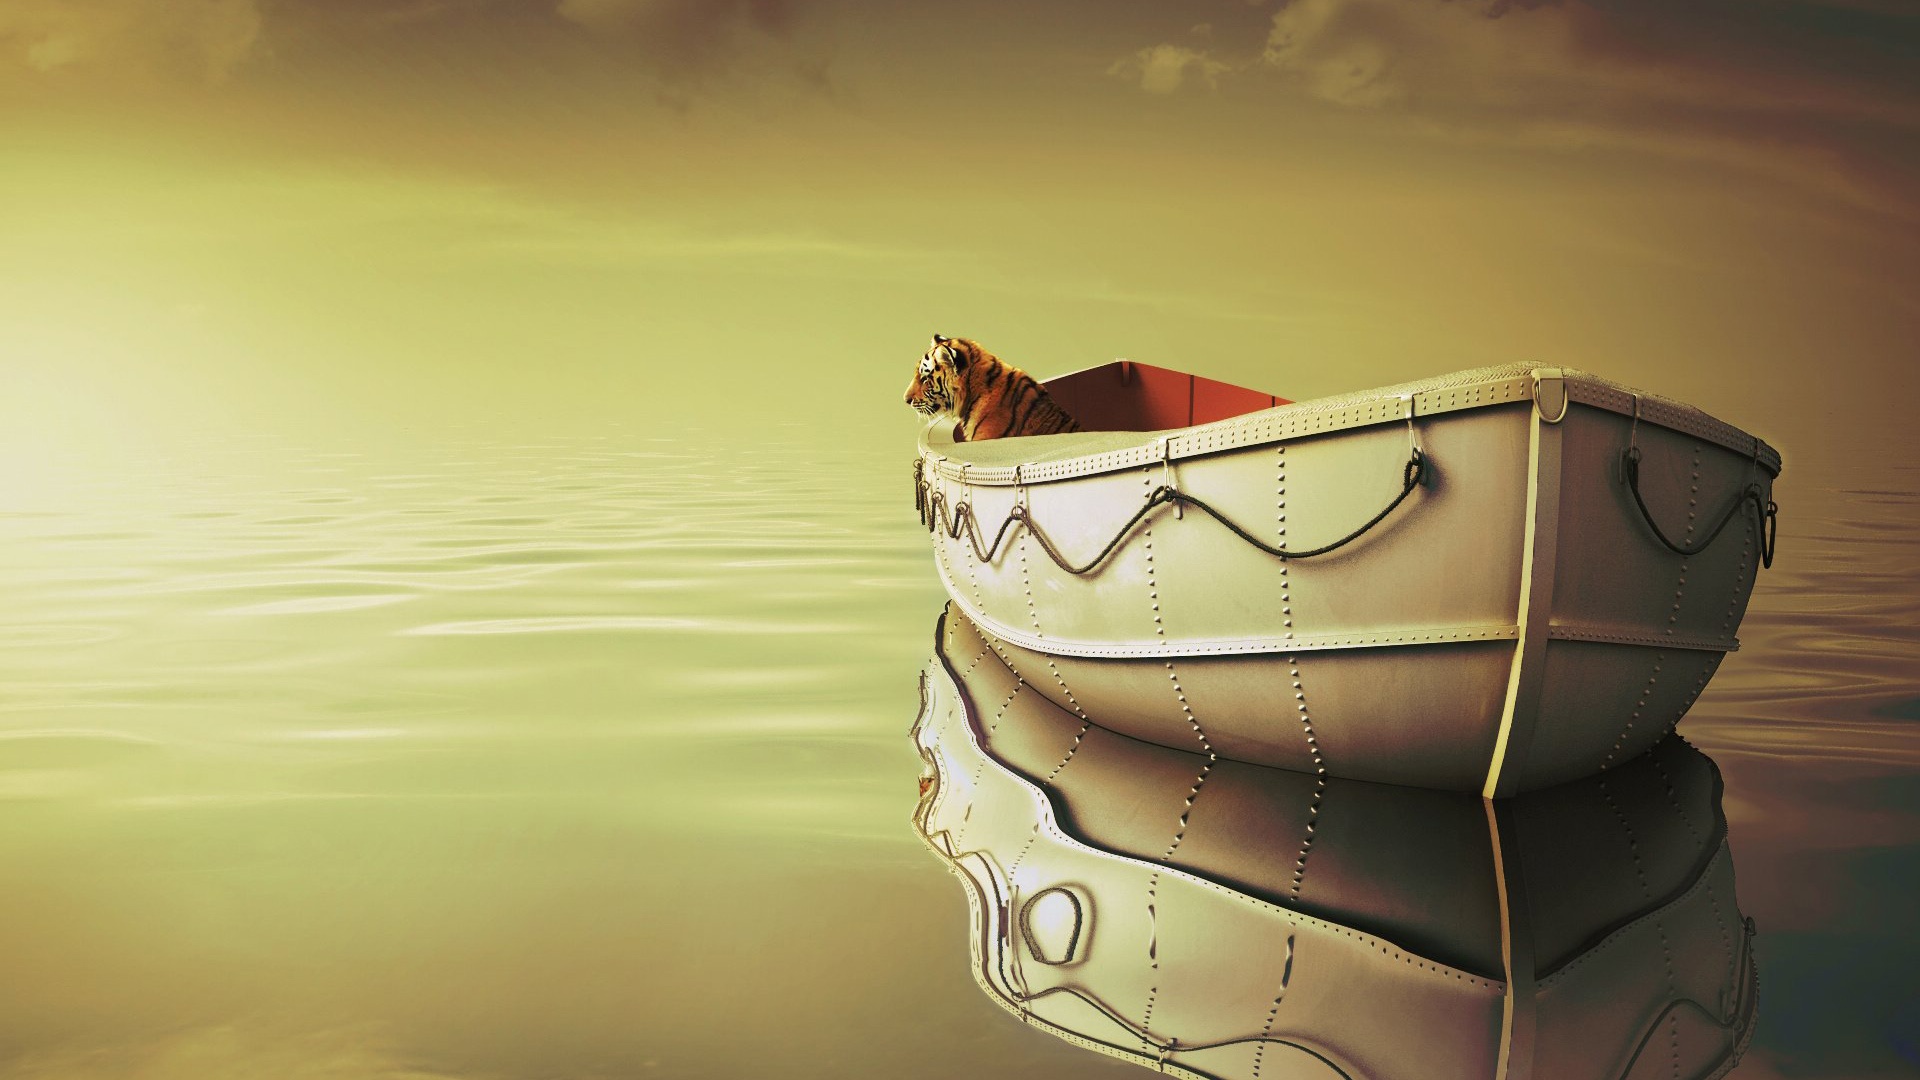 General 1920x1080 Life of Pi boat tiger ocean view daylight